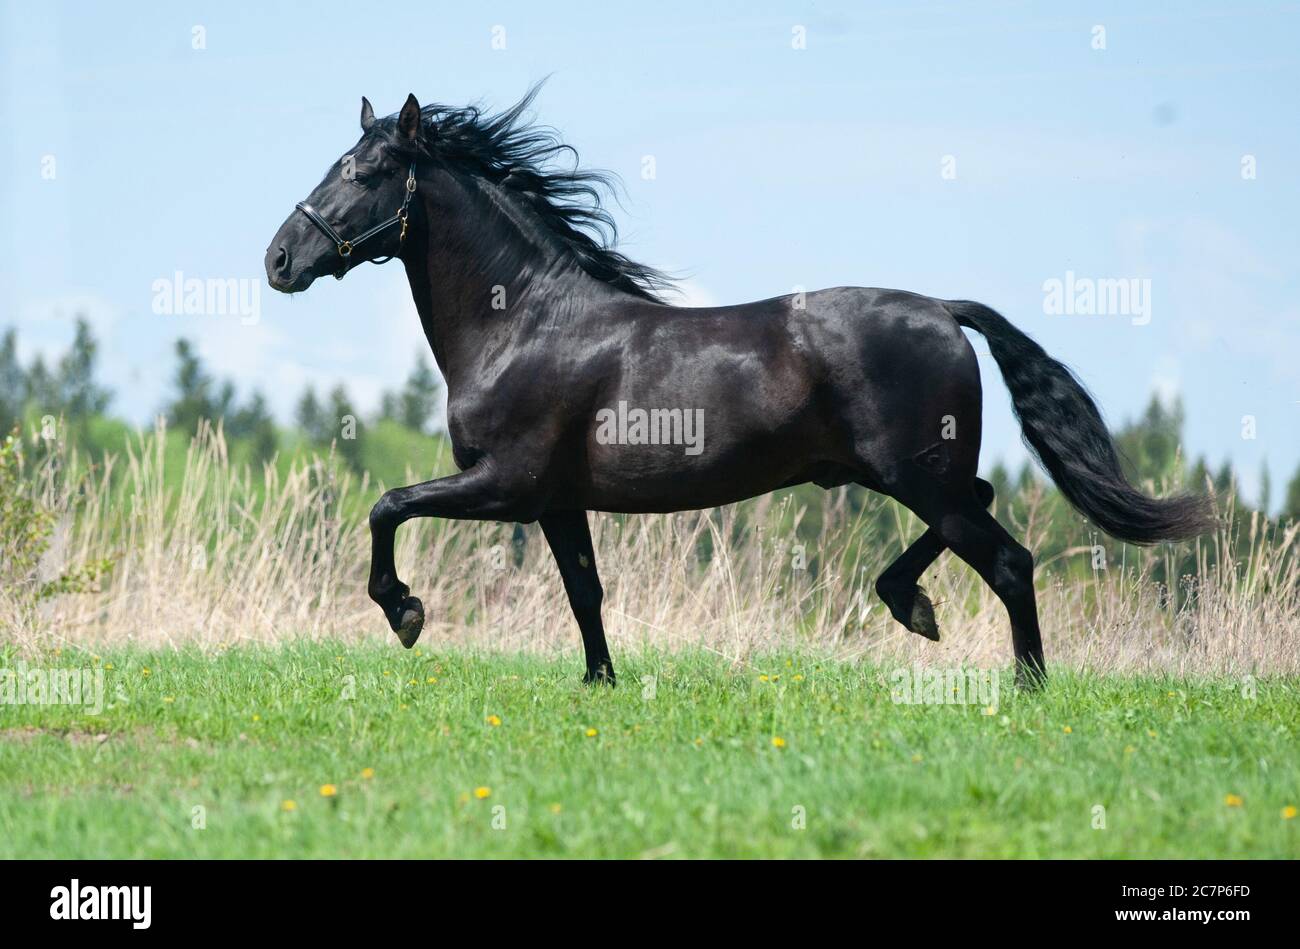 Raven andalusian horse running on freedom Stock Photo